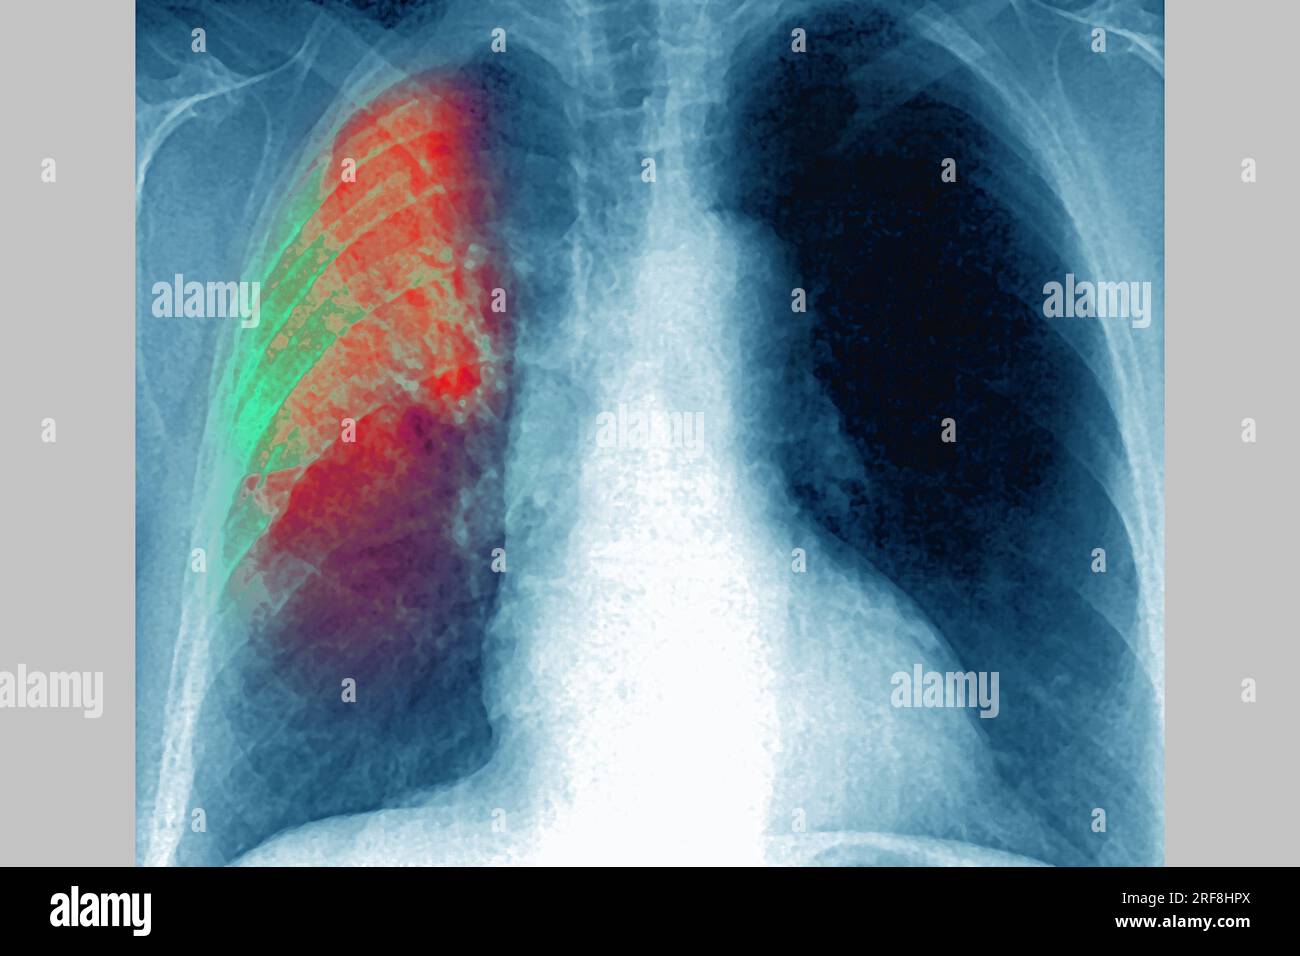 Pneumonia in a right lung (acute respiratory infection), revealed by frontal chest X-ray. Stock Photo